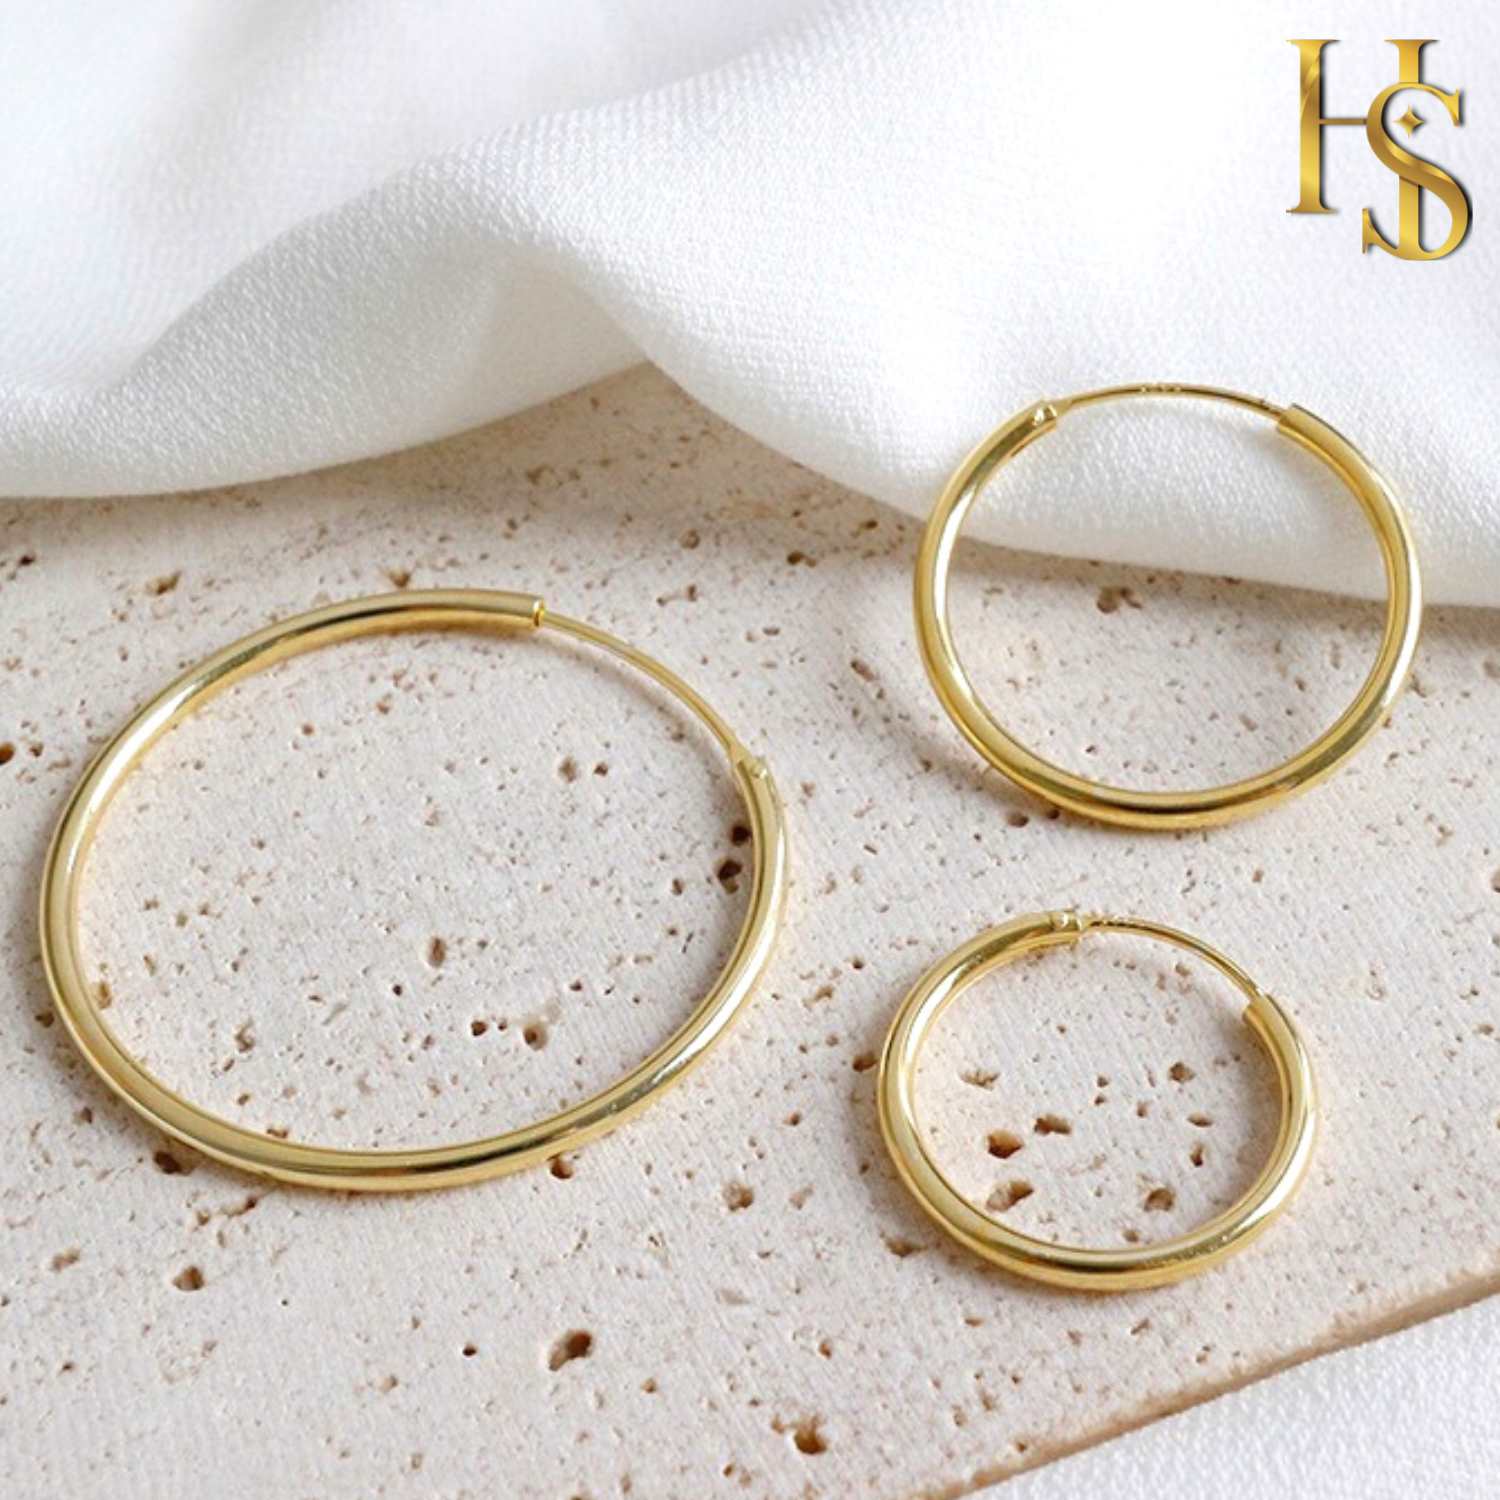 Classic Gold Hoop Earrings in 92.5 Silver - 1.2mm Thickness - Big Sizes 25mm to 50mm -  18K Gold finish